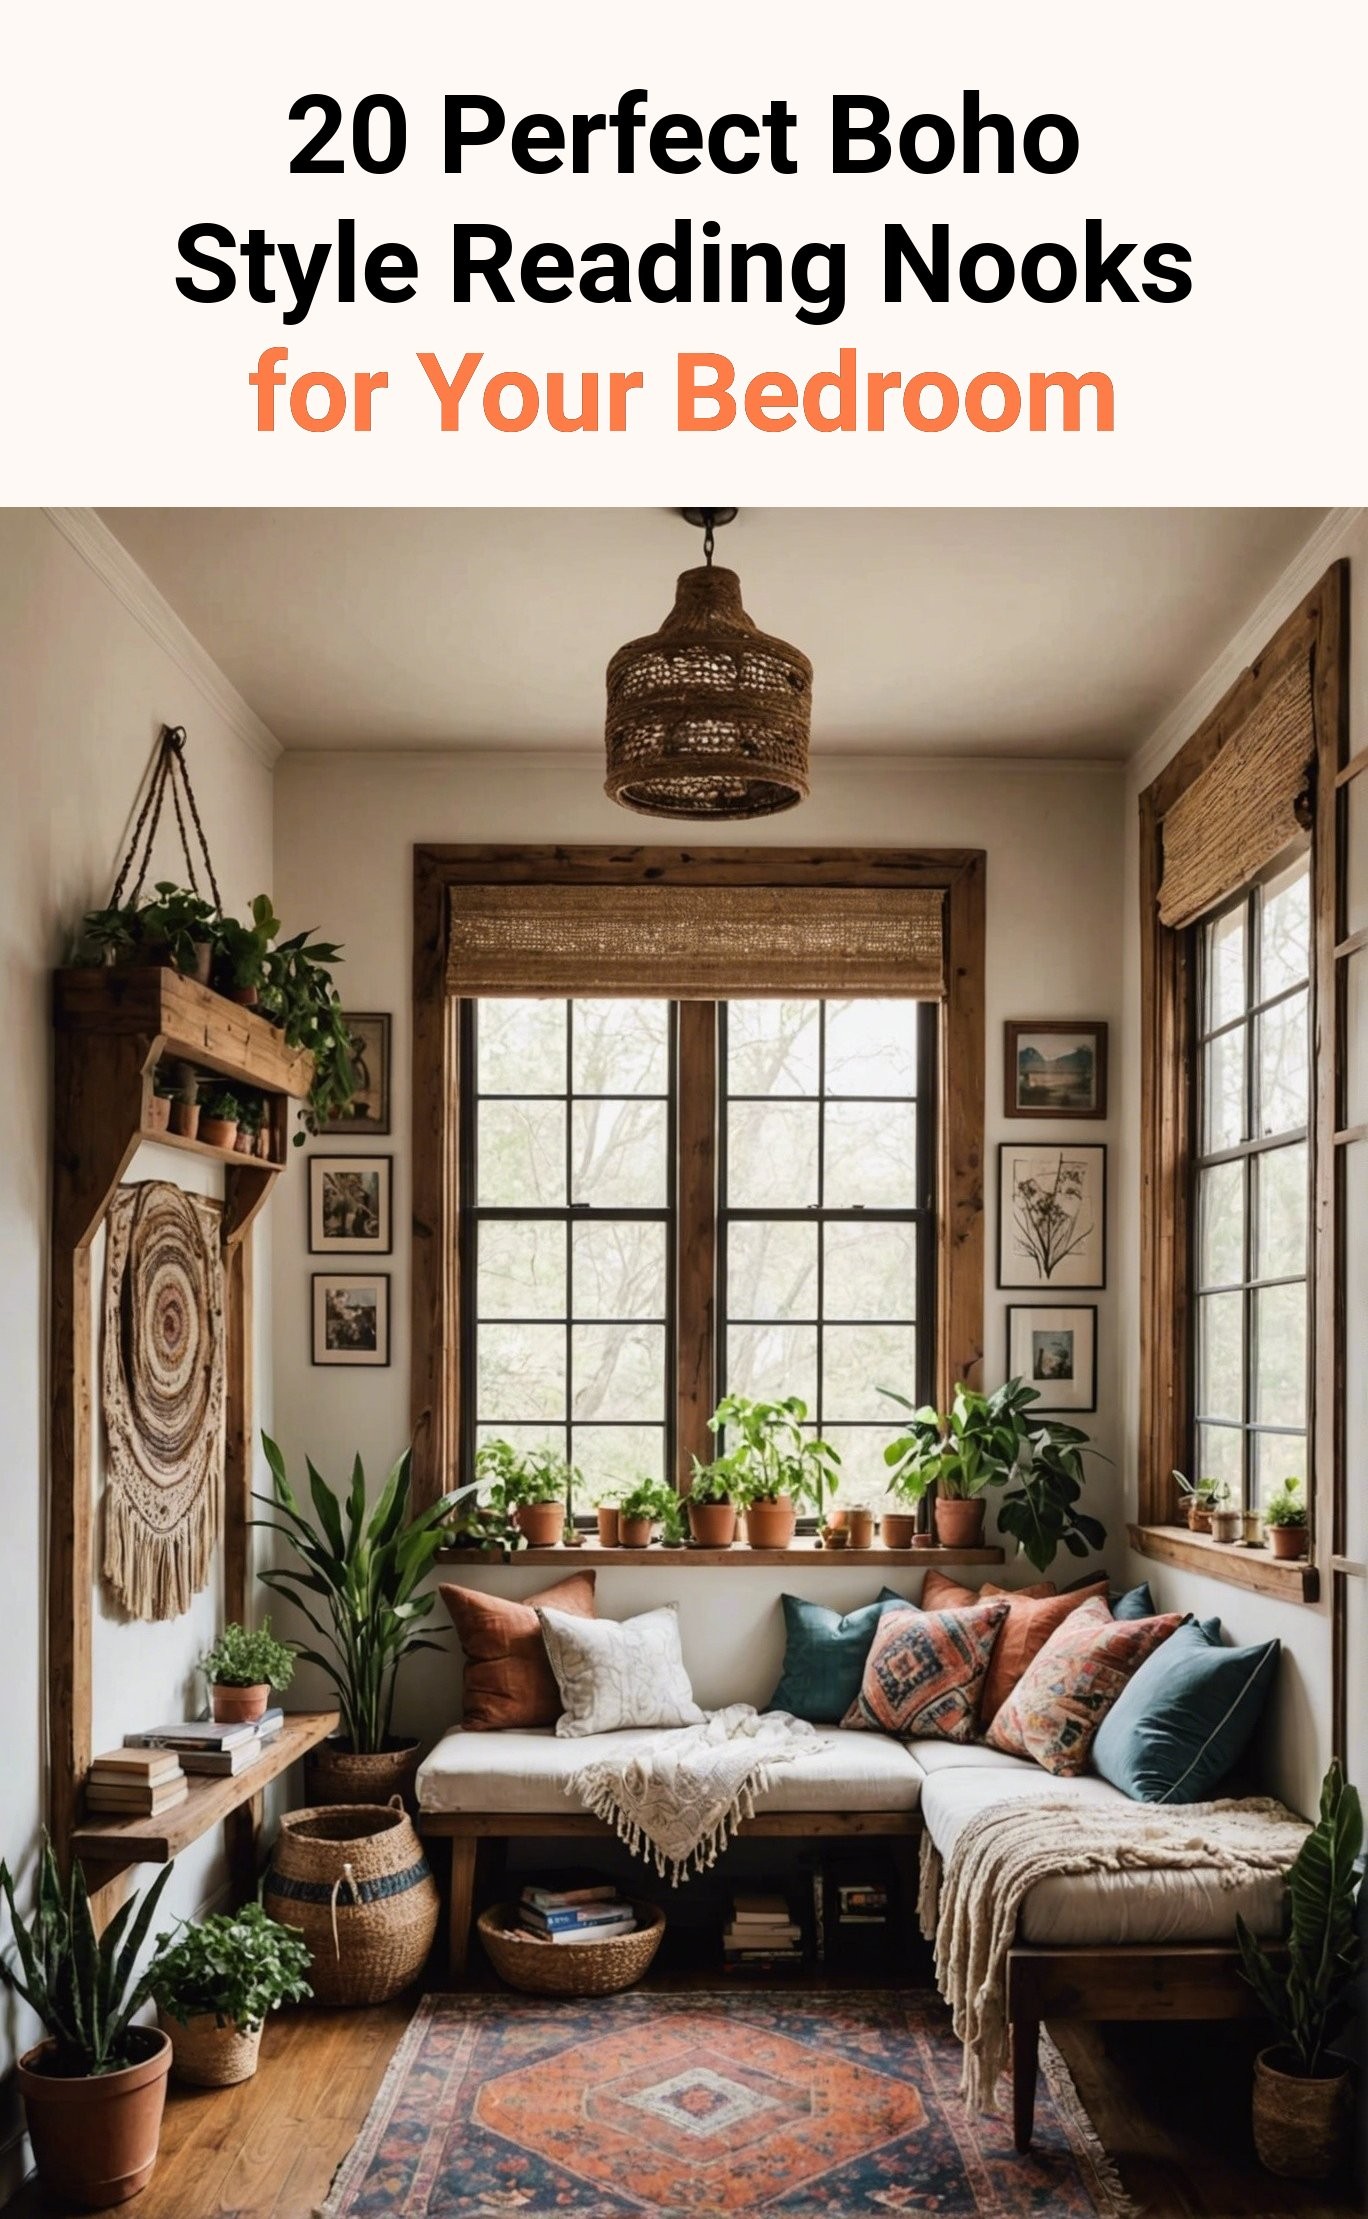 20 Perfect Boho Style Reading Nooks for Your Bedroom